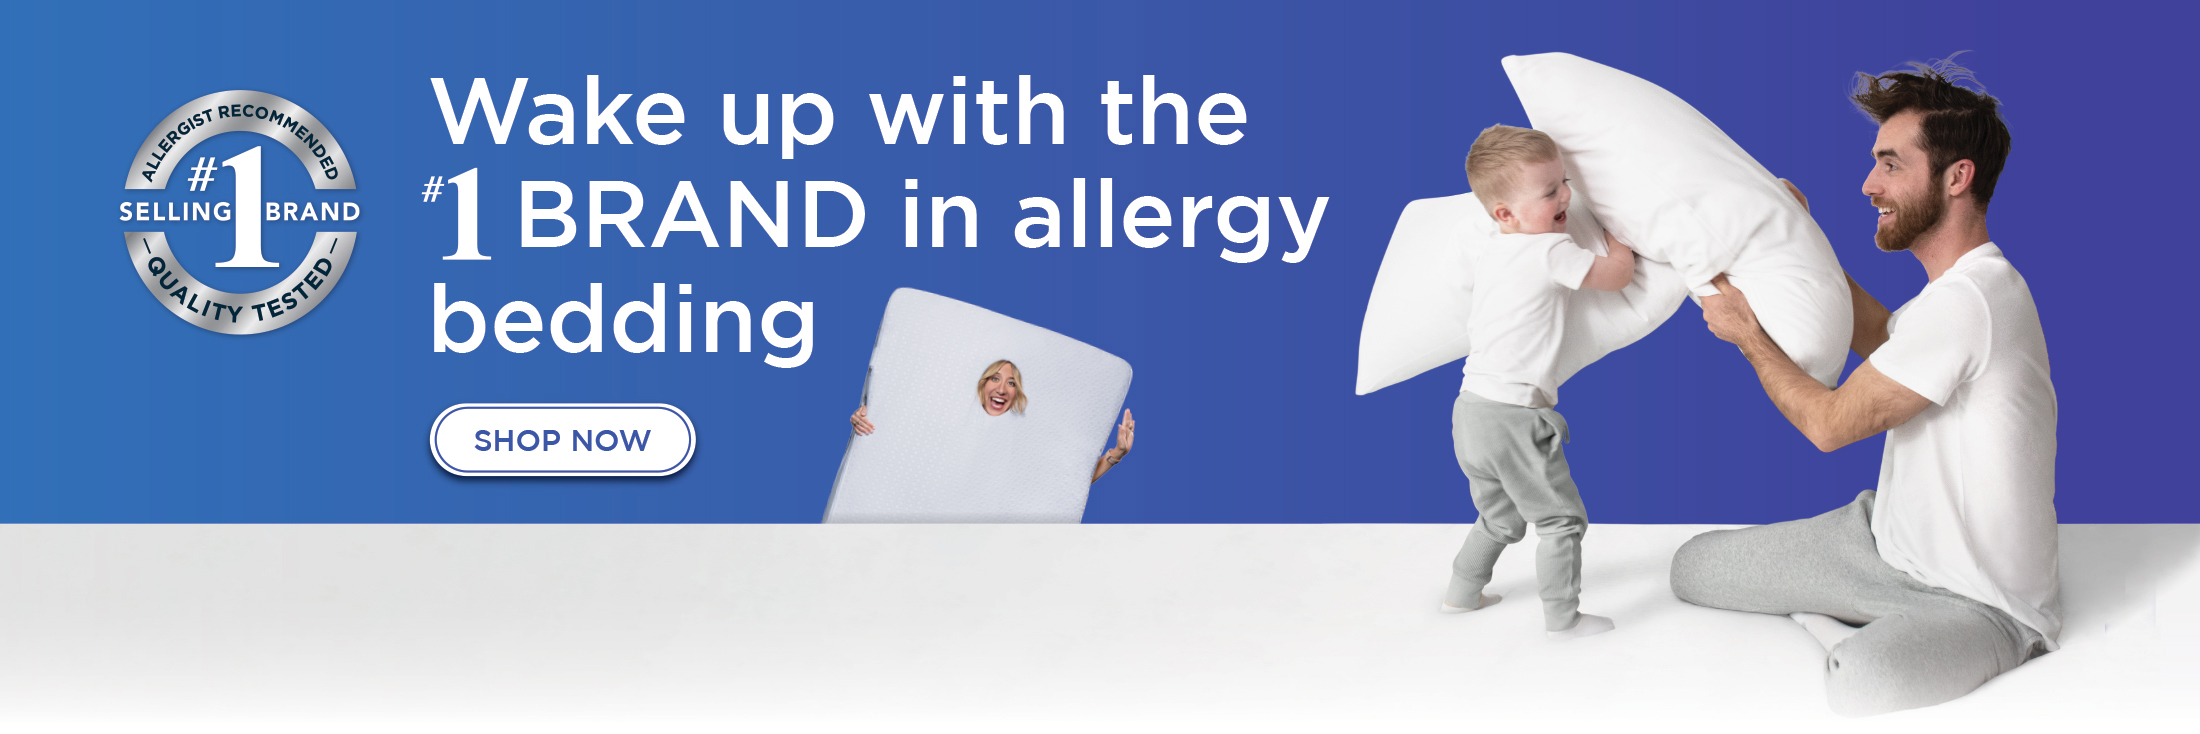 Wake up with the #1 brand in allergy bedding.